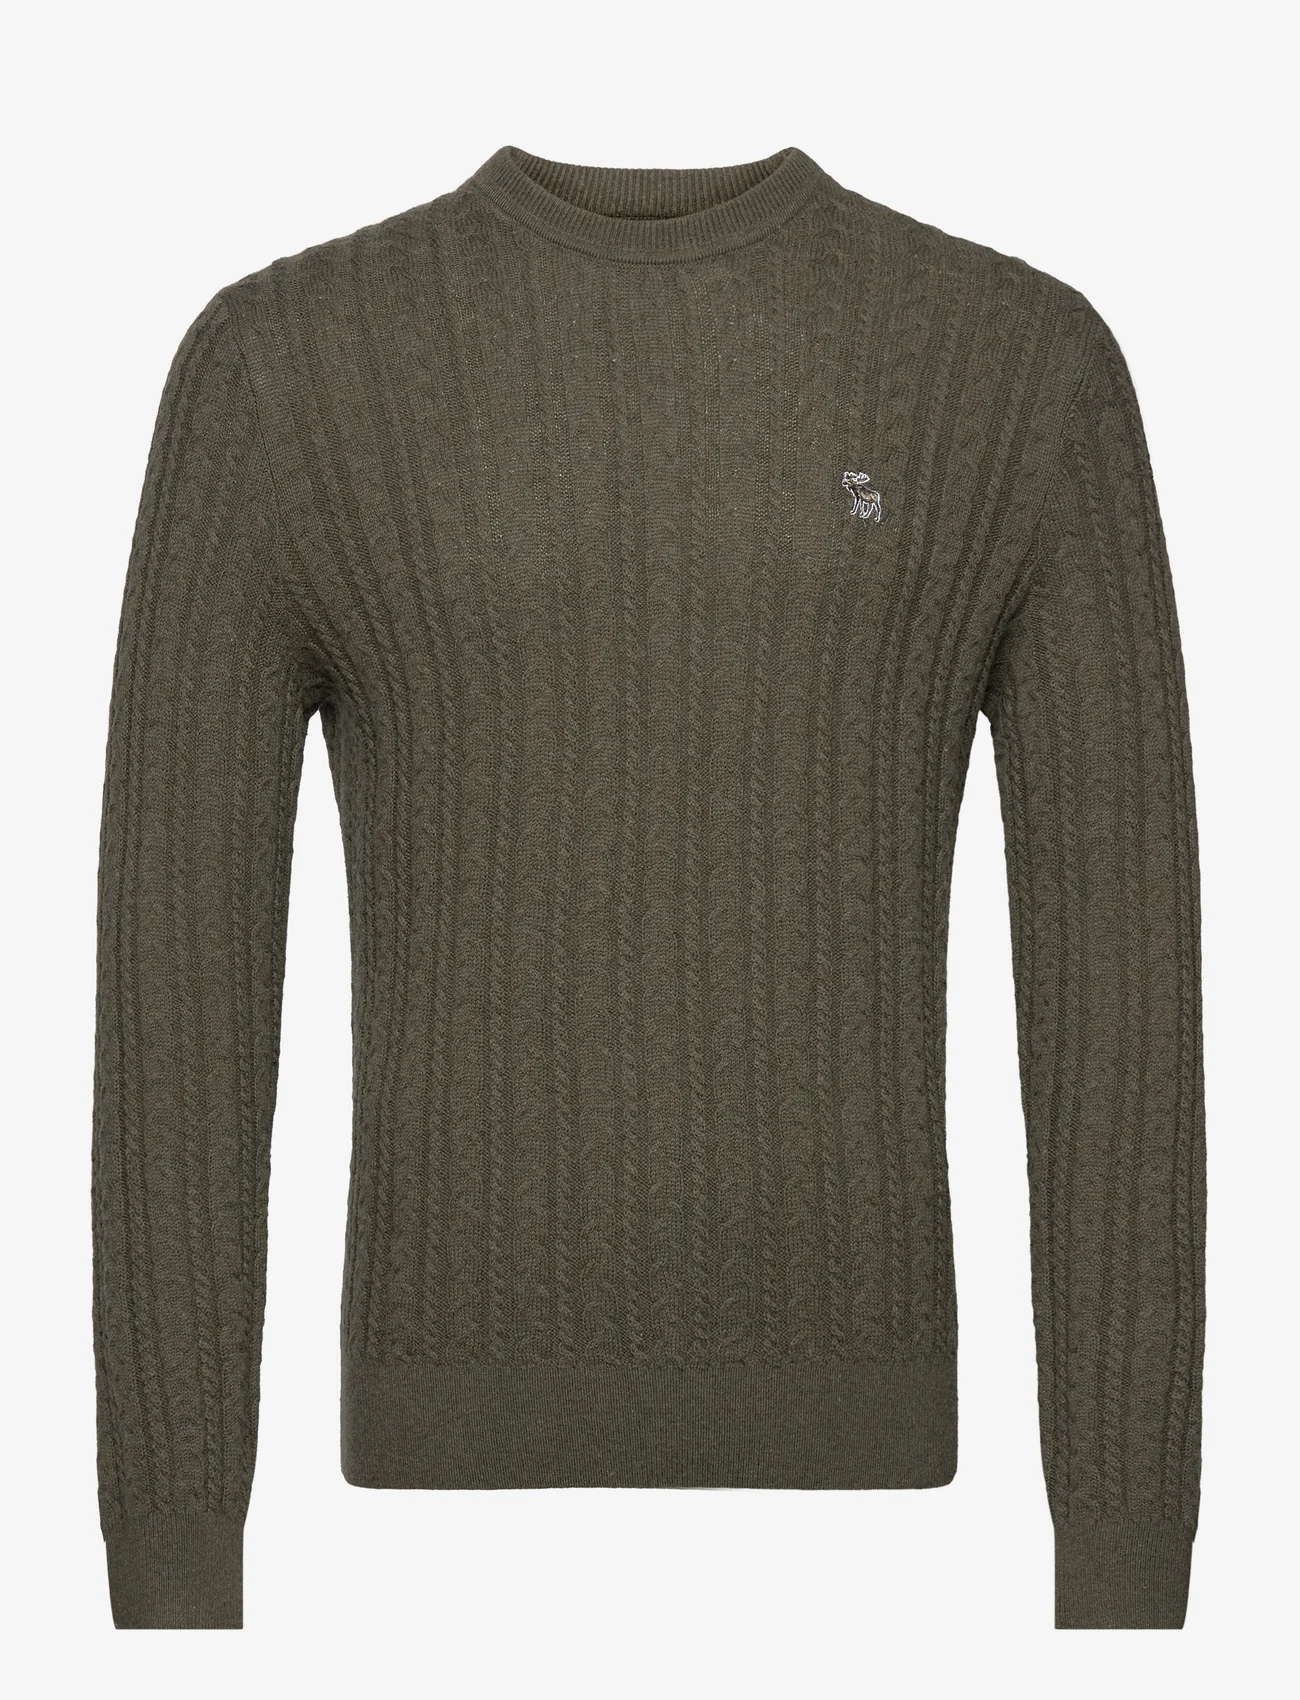 Abercrombie & Fitch - ANF MENS SWEATERS - megztinis su apvalios formos apykakle - olive heather - 0